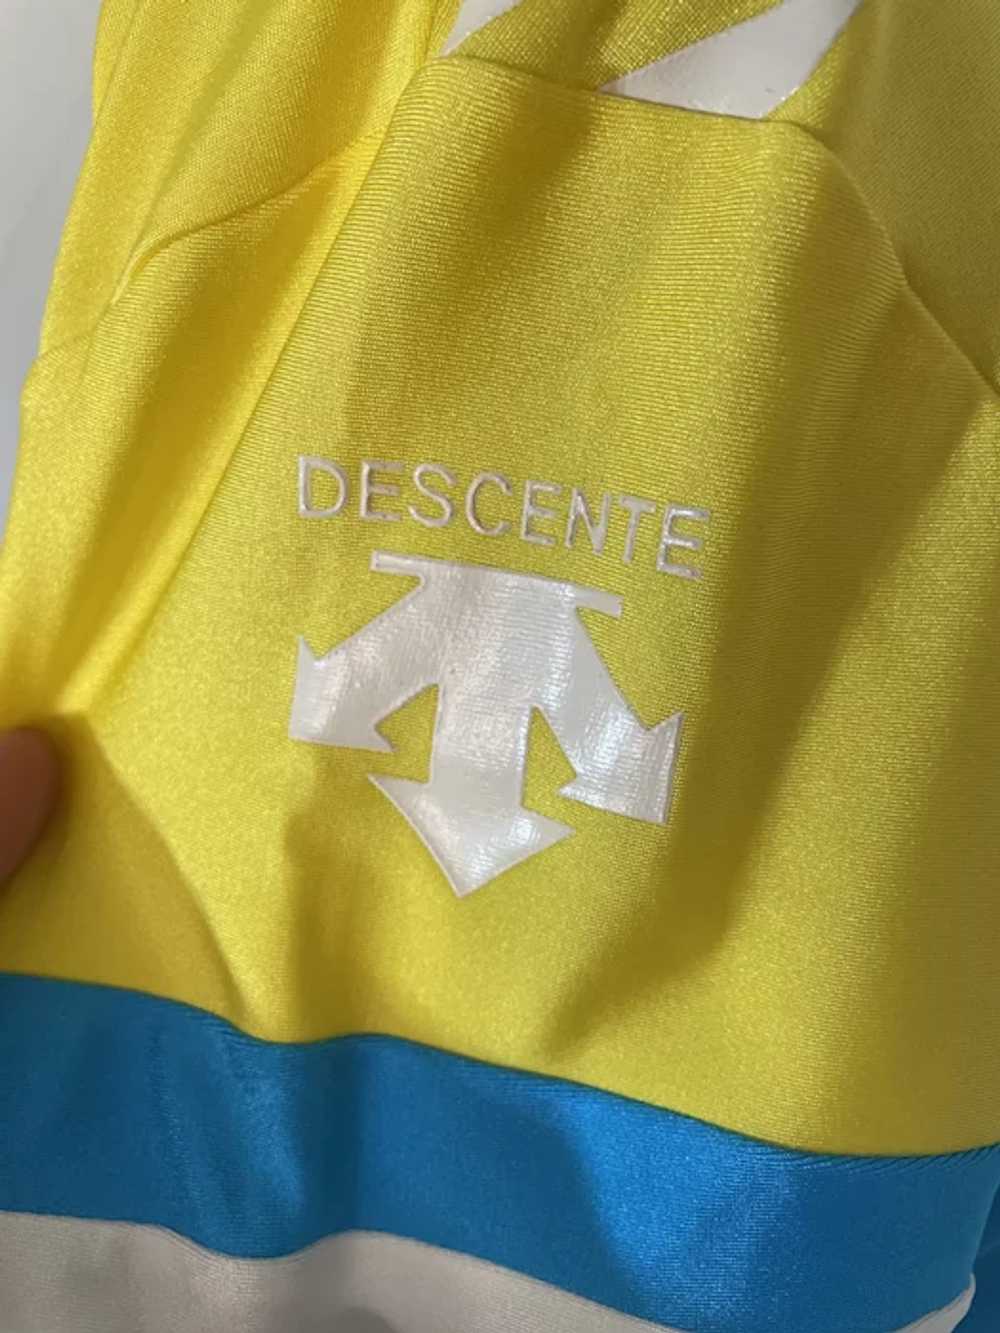 Vintage 1990s Descente Yellow and Blue Long Sleev… - image 5